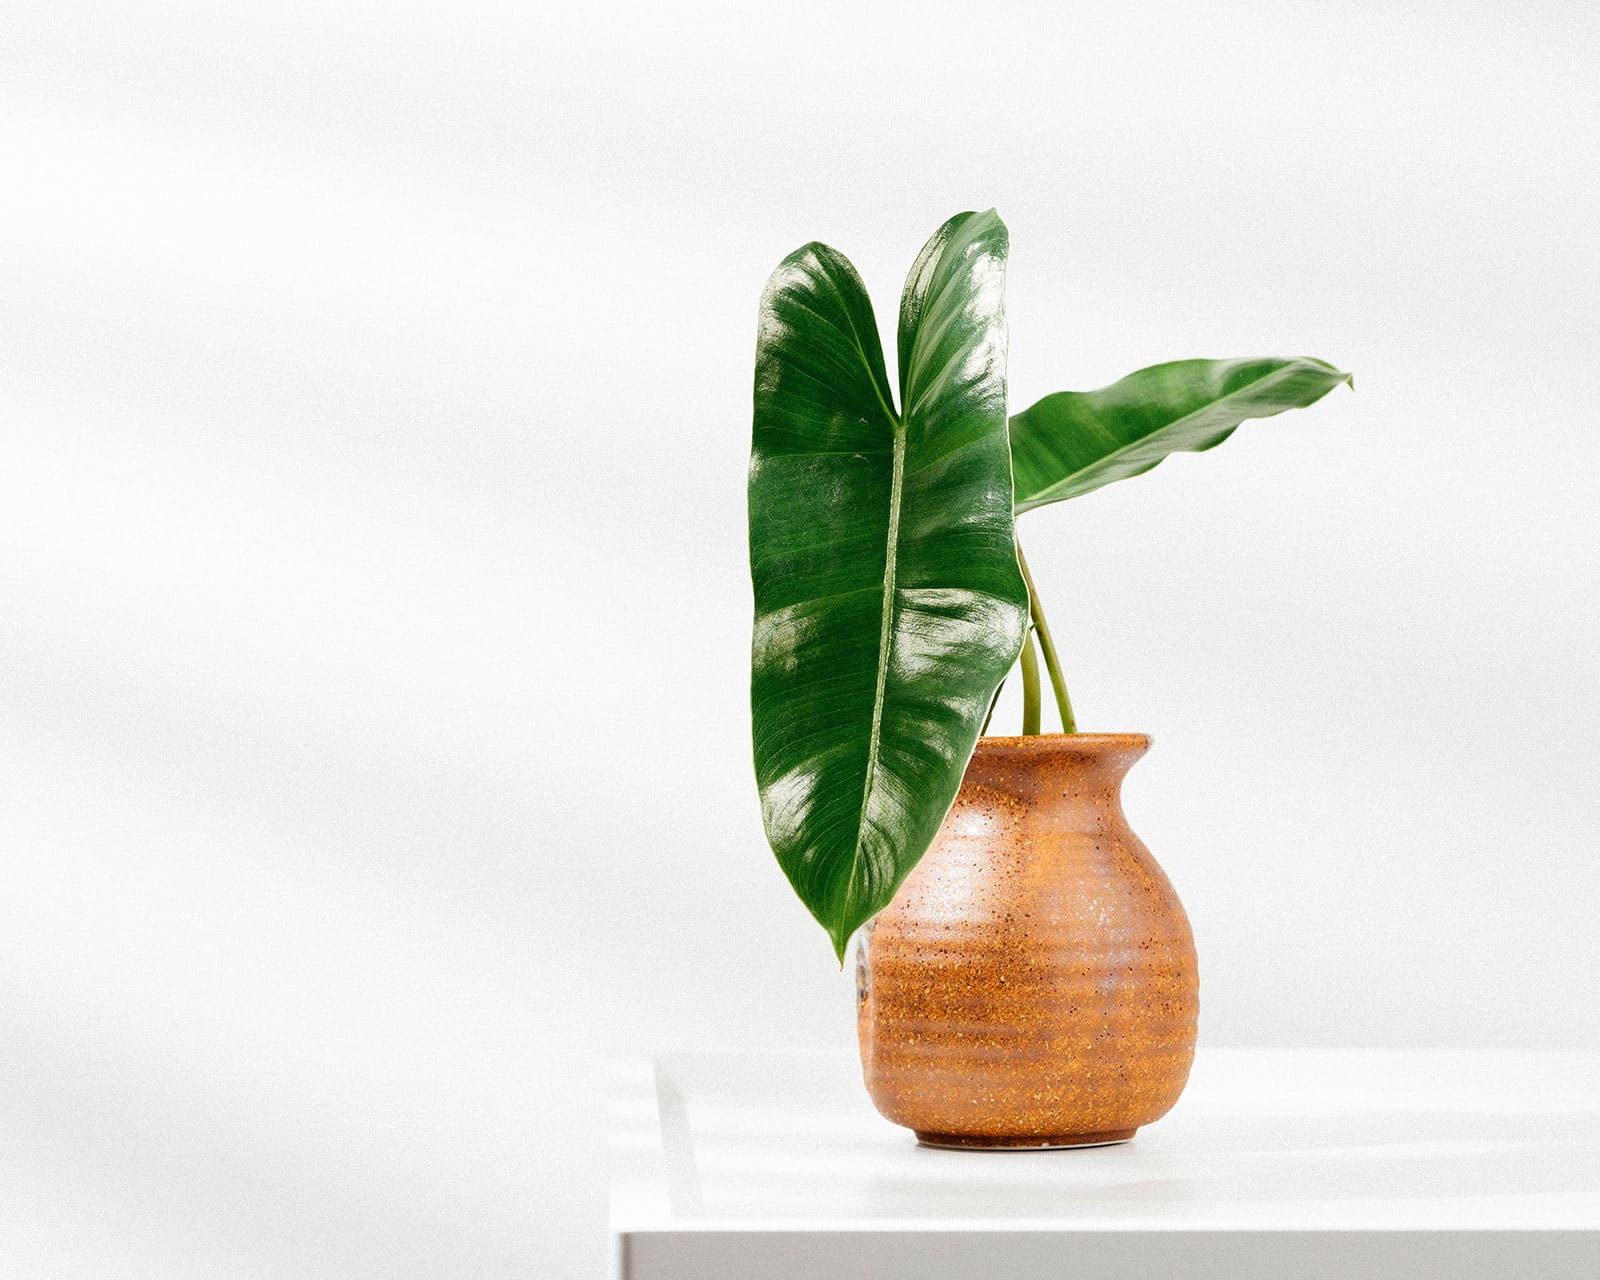 A young Philodendron burle marxii houseplant in a brown ceramic pot, shot against a white background on a white table